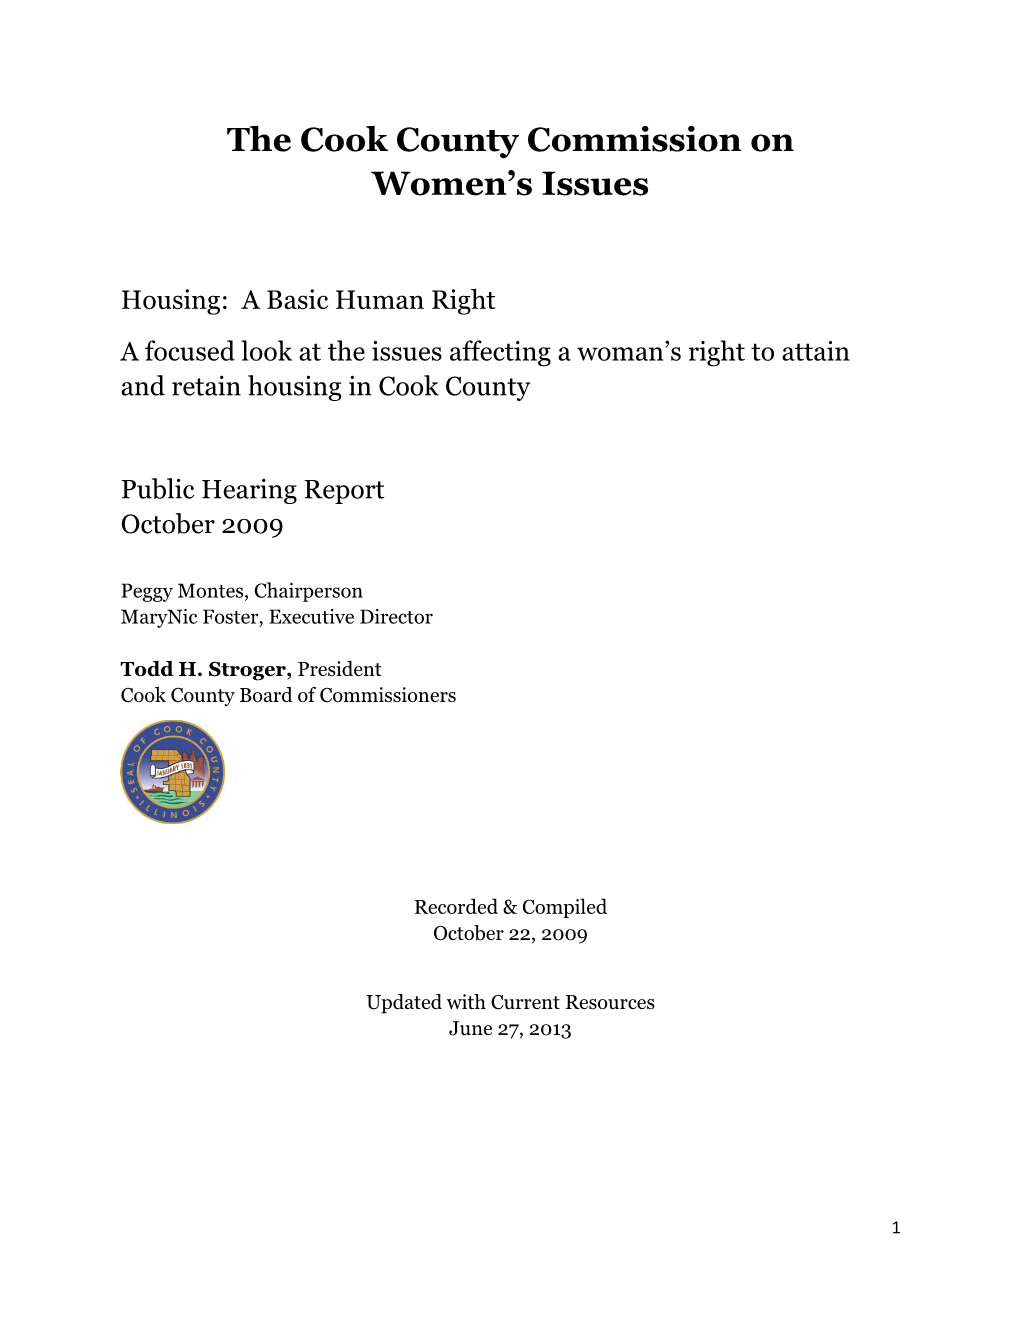 The Cook County Commission on Women's Issues